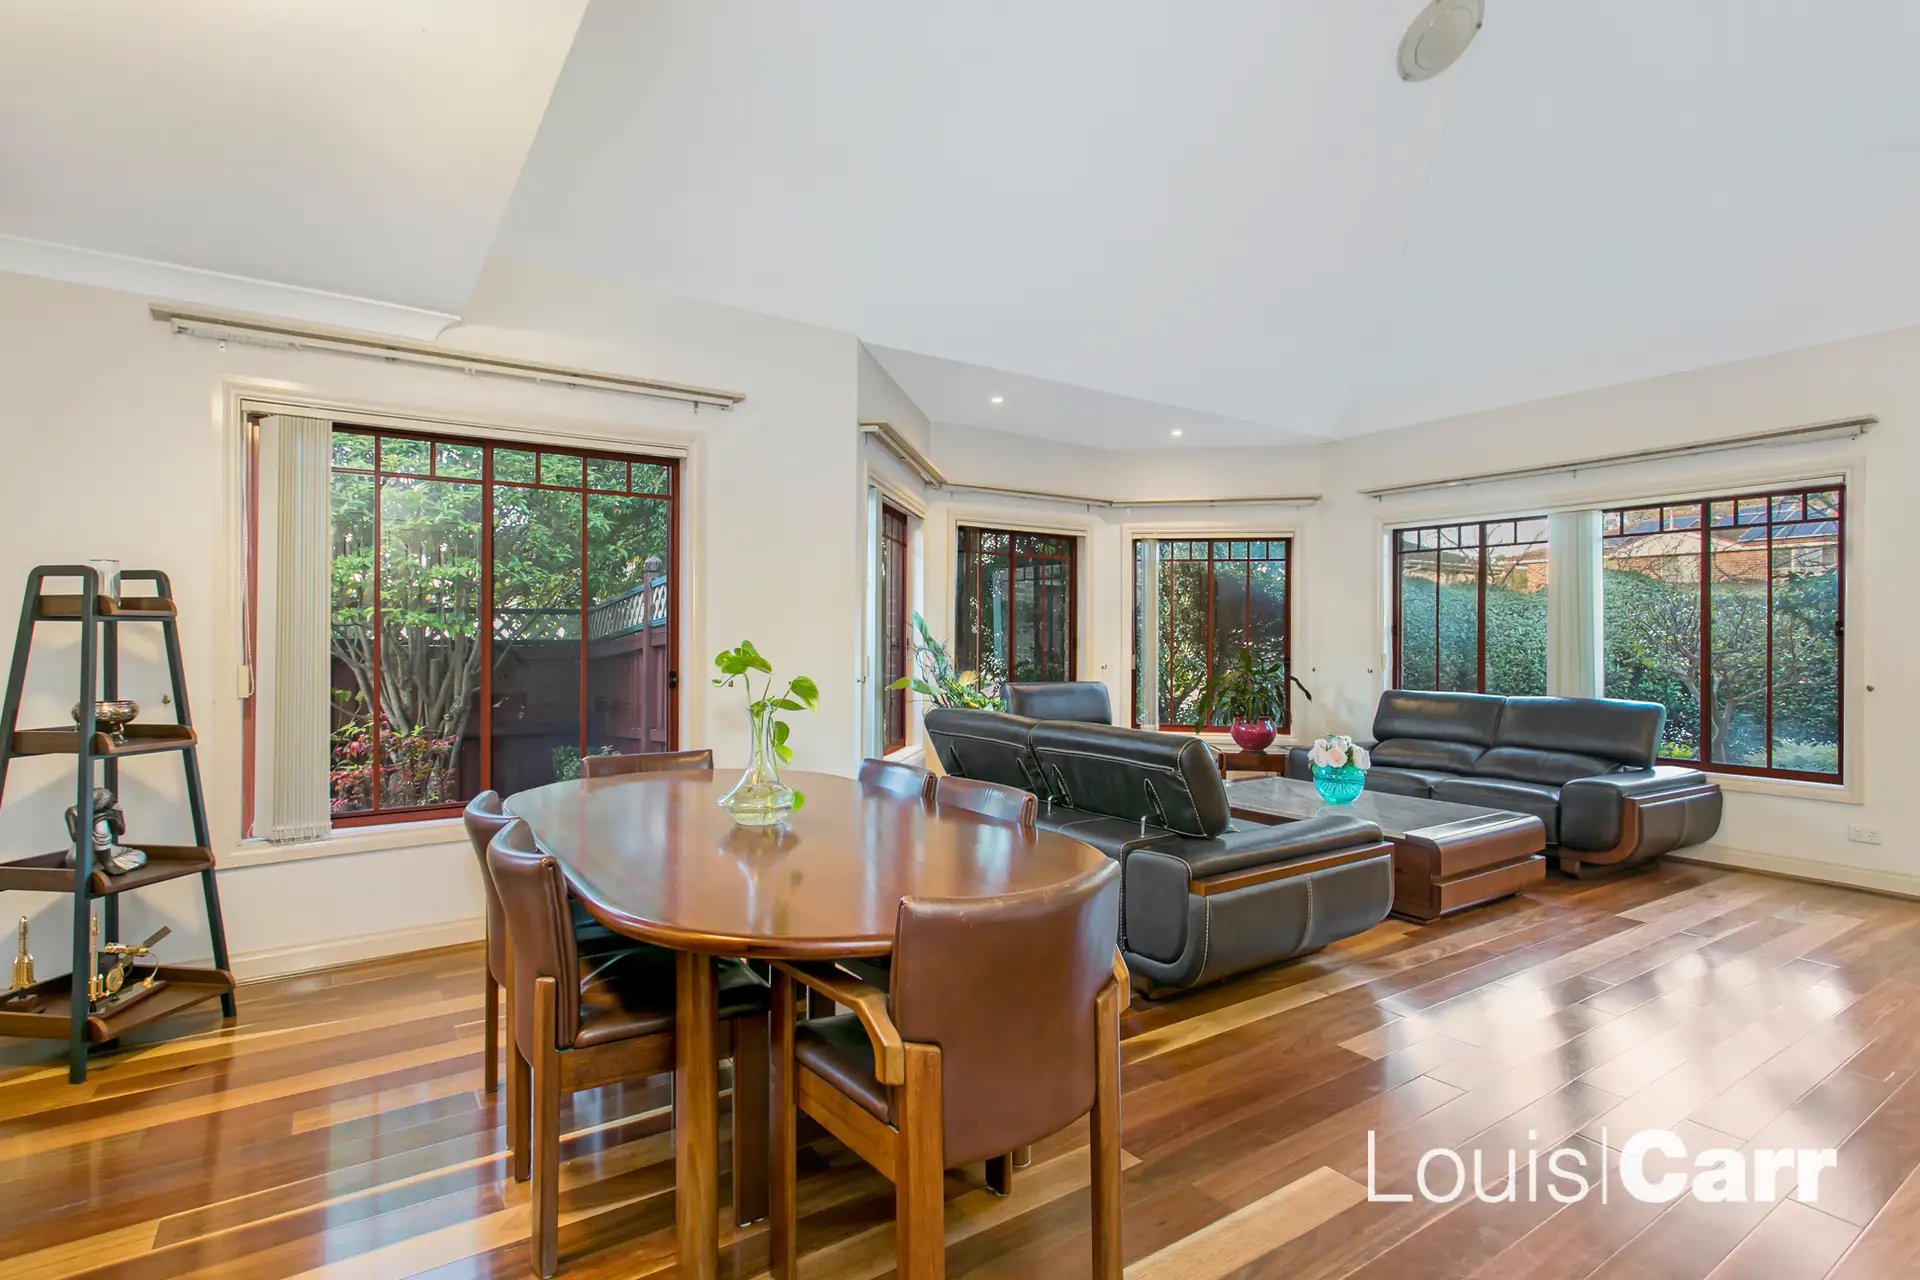 12 John Radley Avenue, Dural Leased by Louis Carr Real Estate - image 3